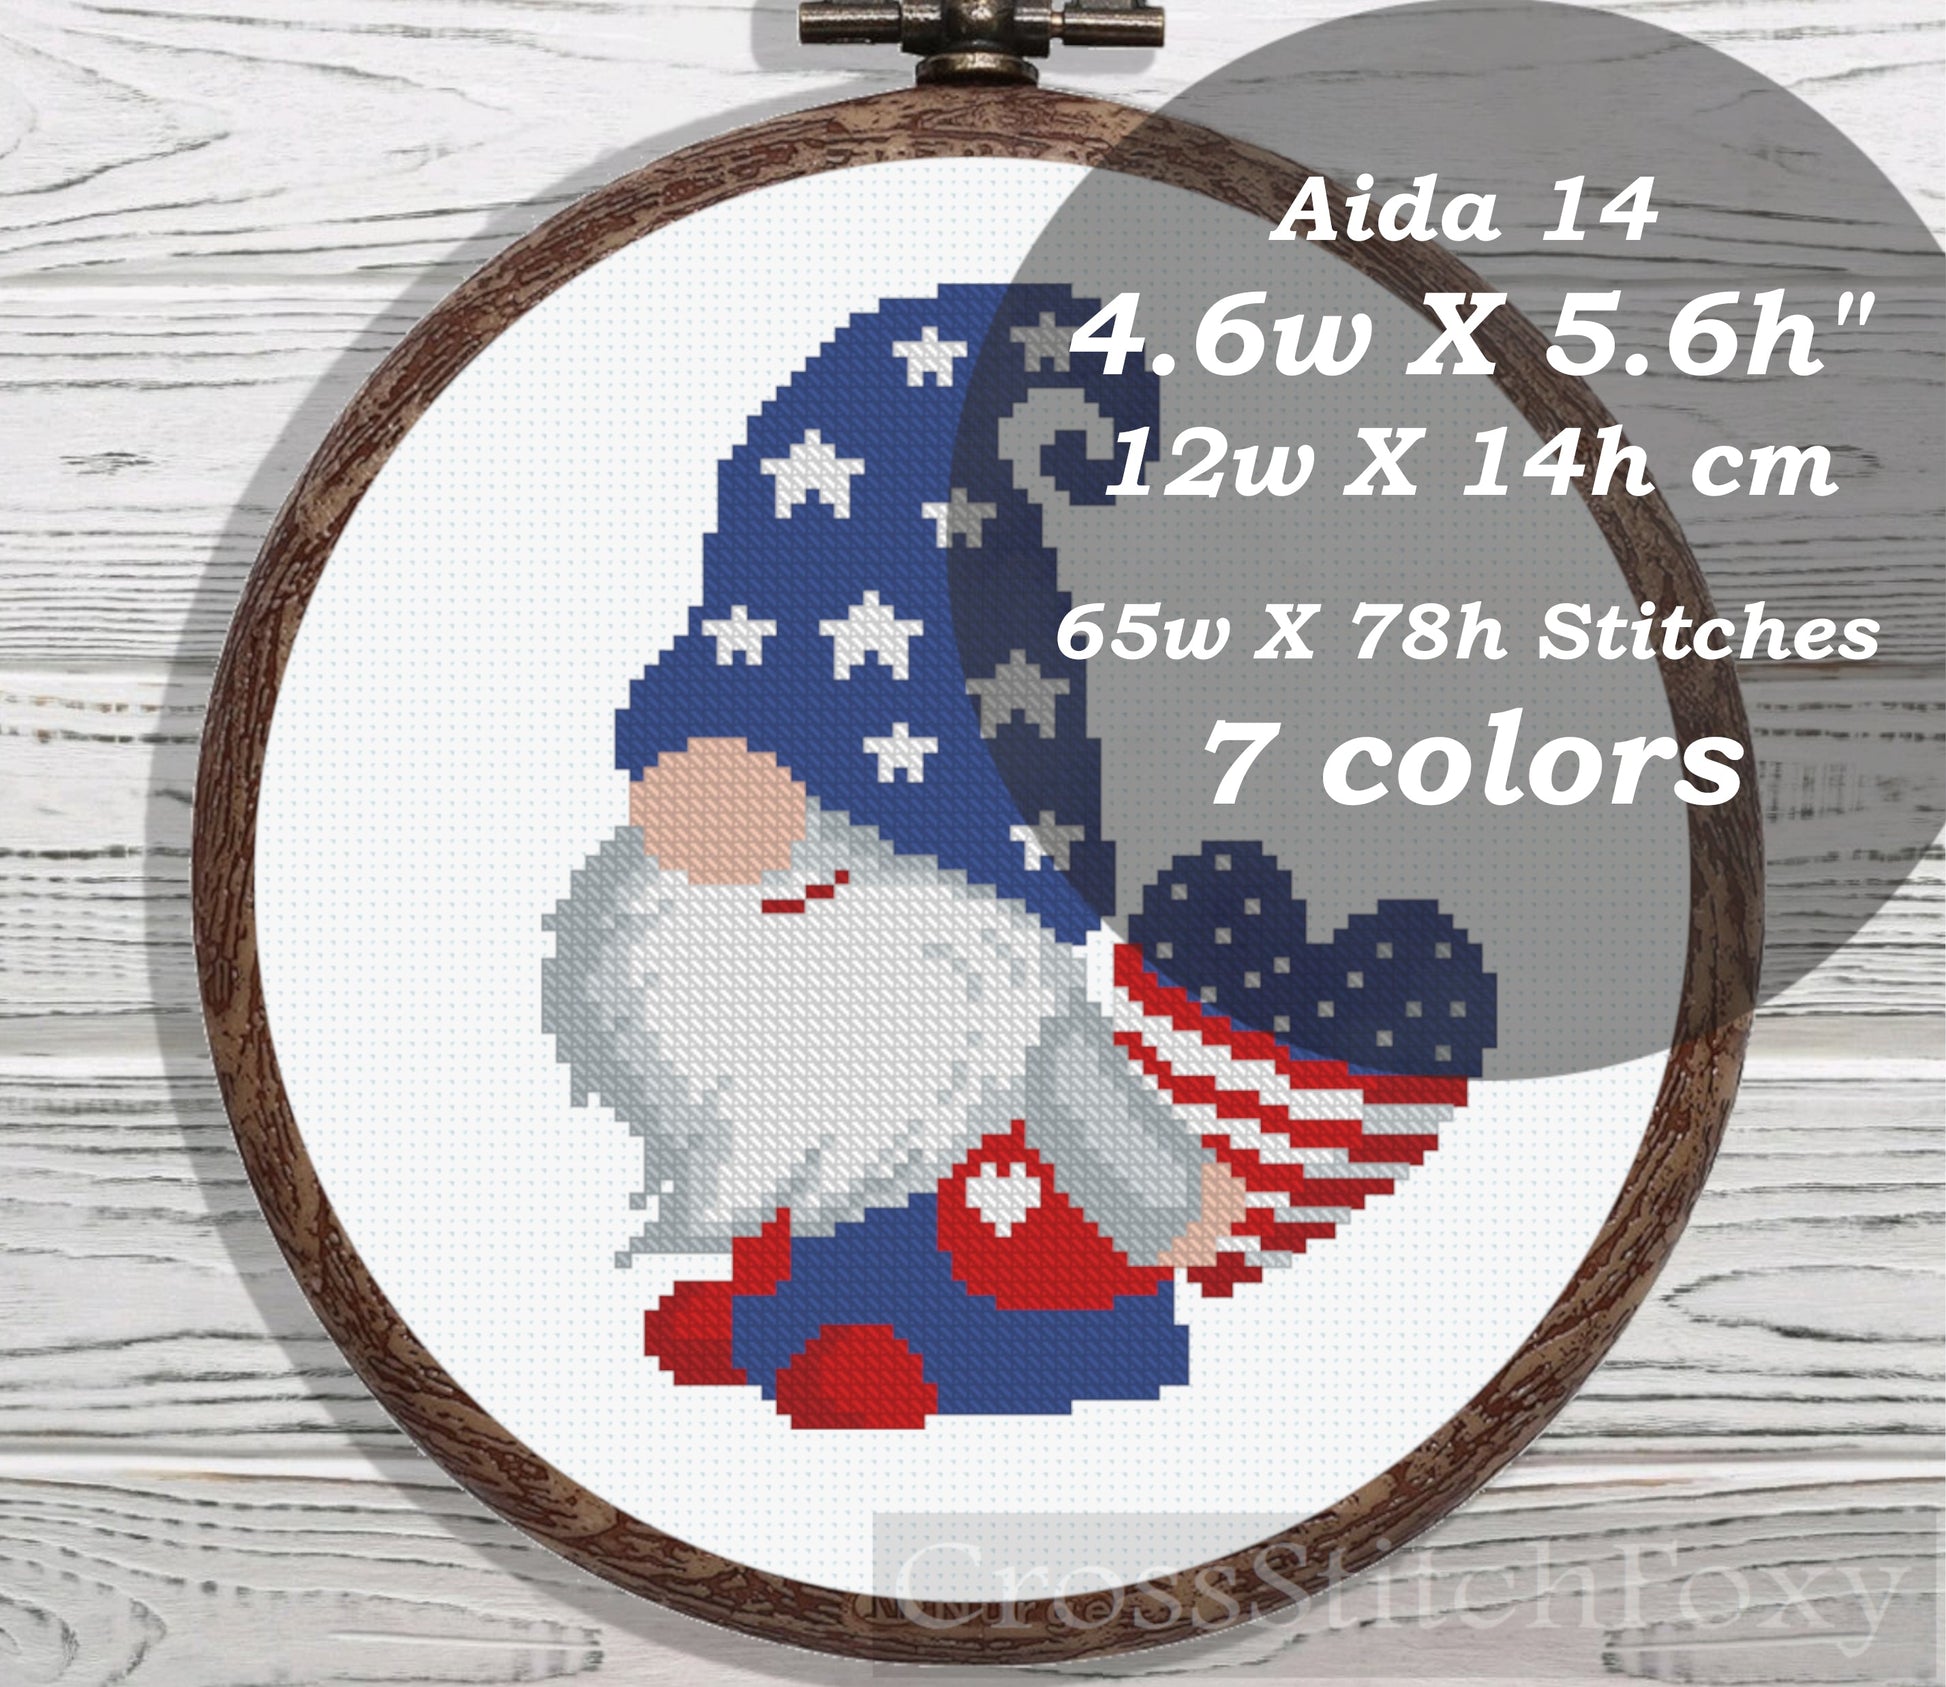 Patriotic Gnome with Heart Flag cross stitch pattern